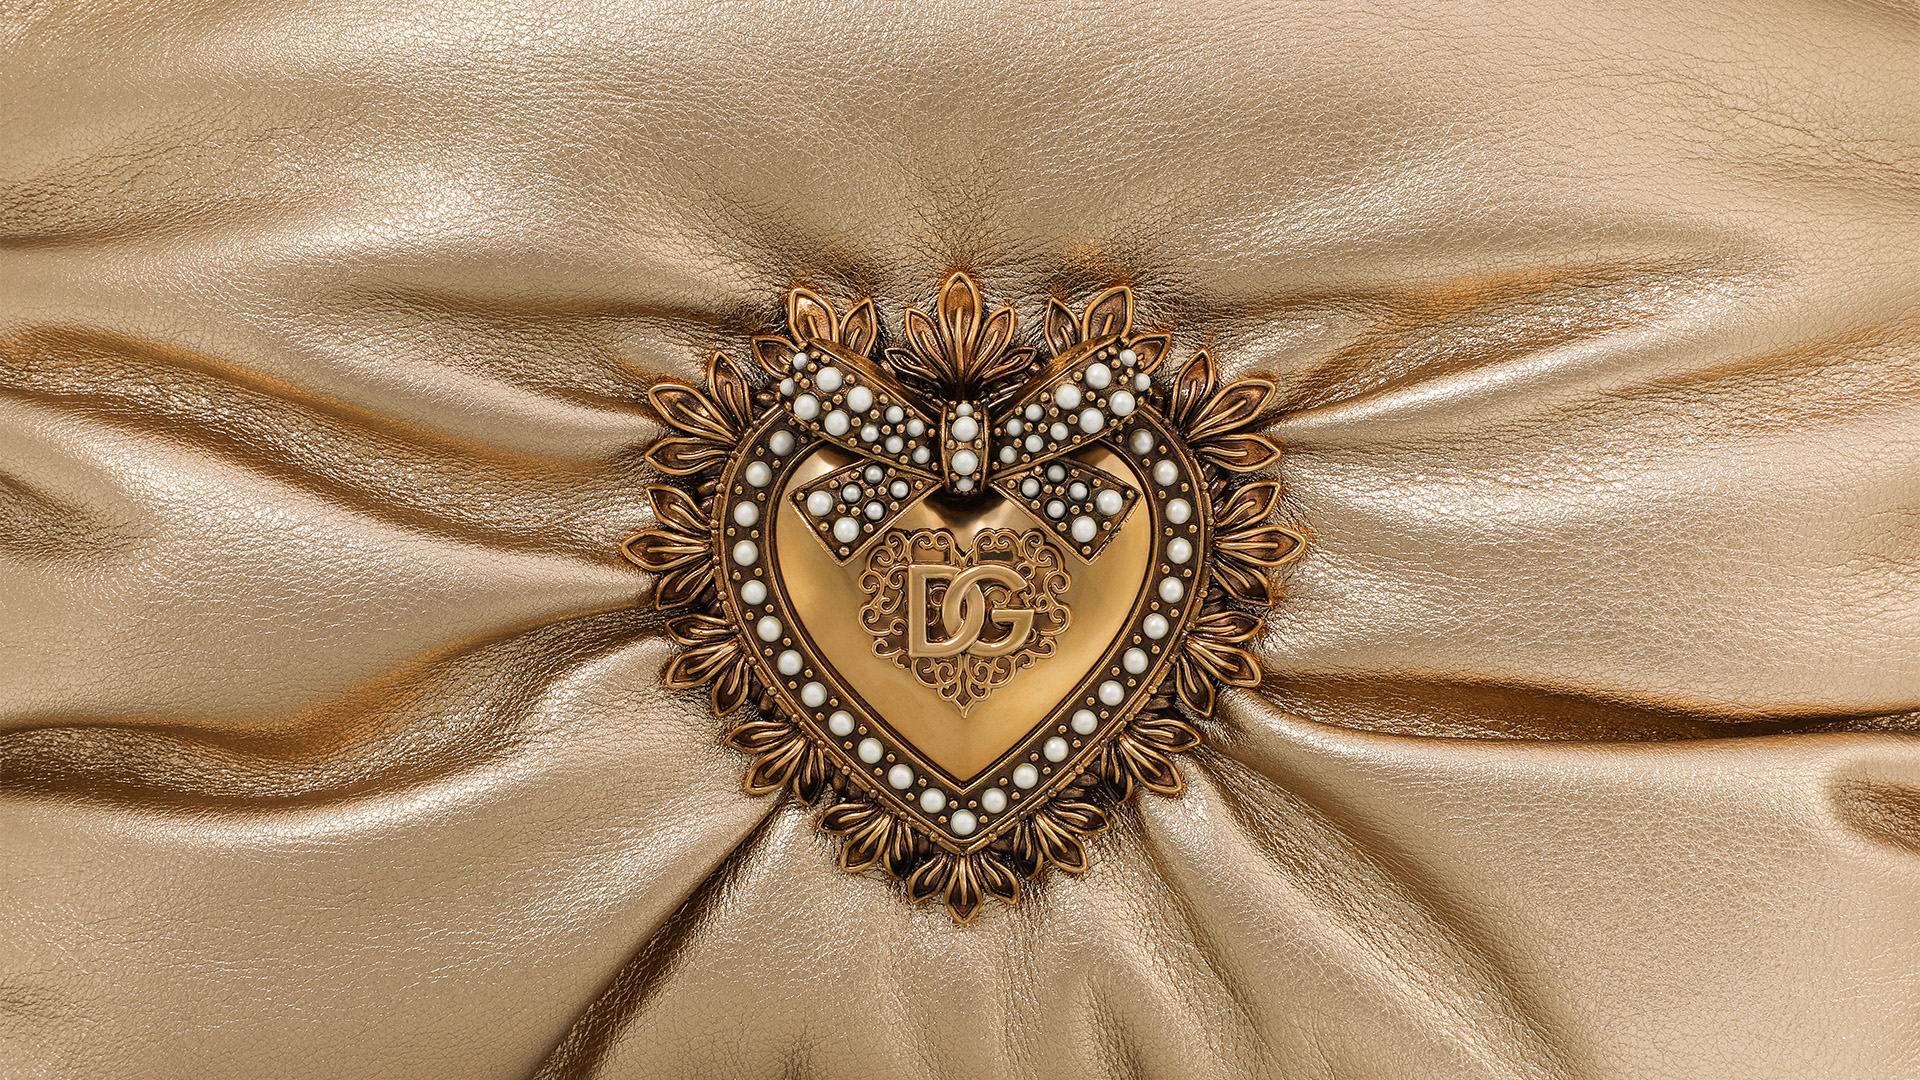 dolce-and-gabbana-valentines-selection-gift-idea-banner